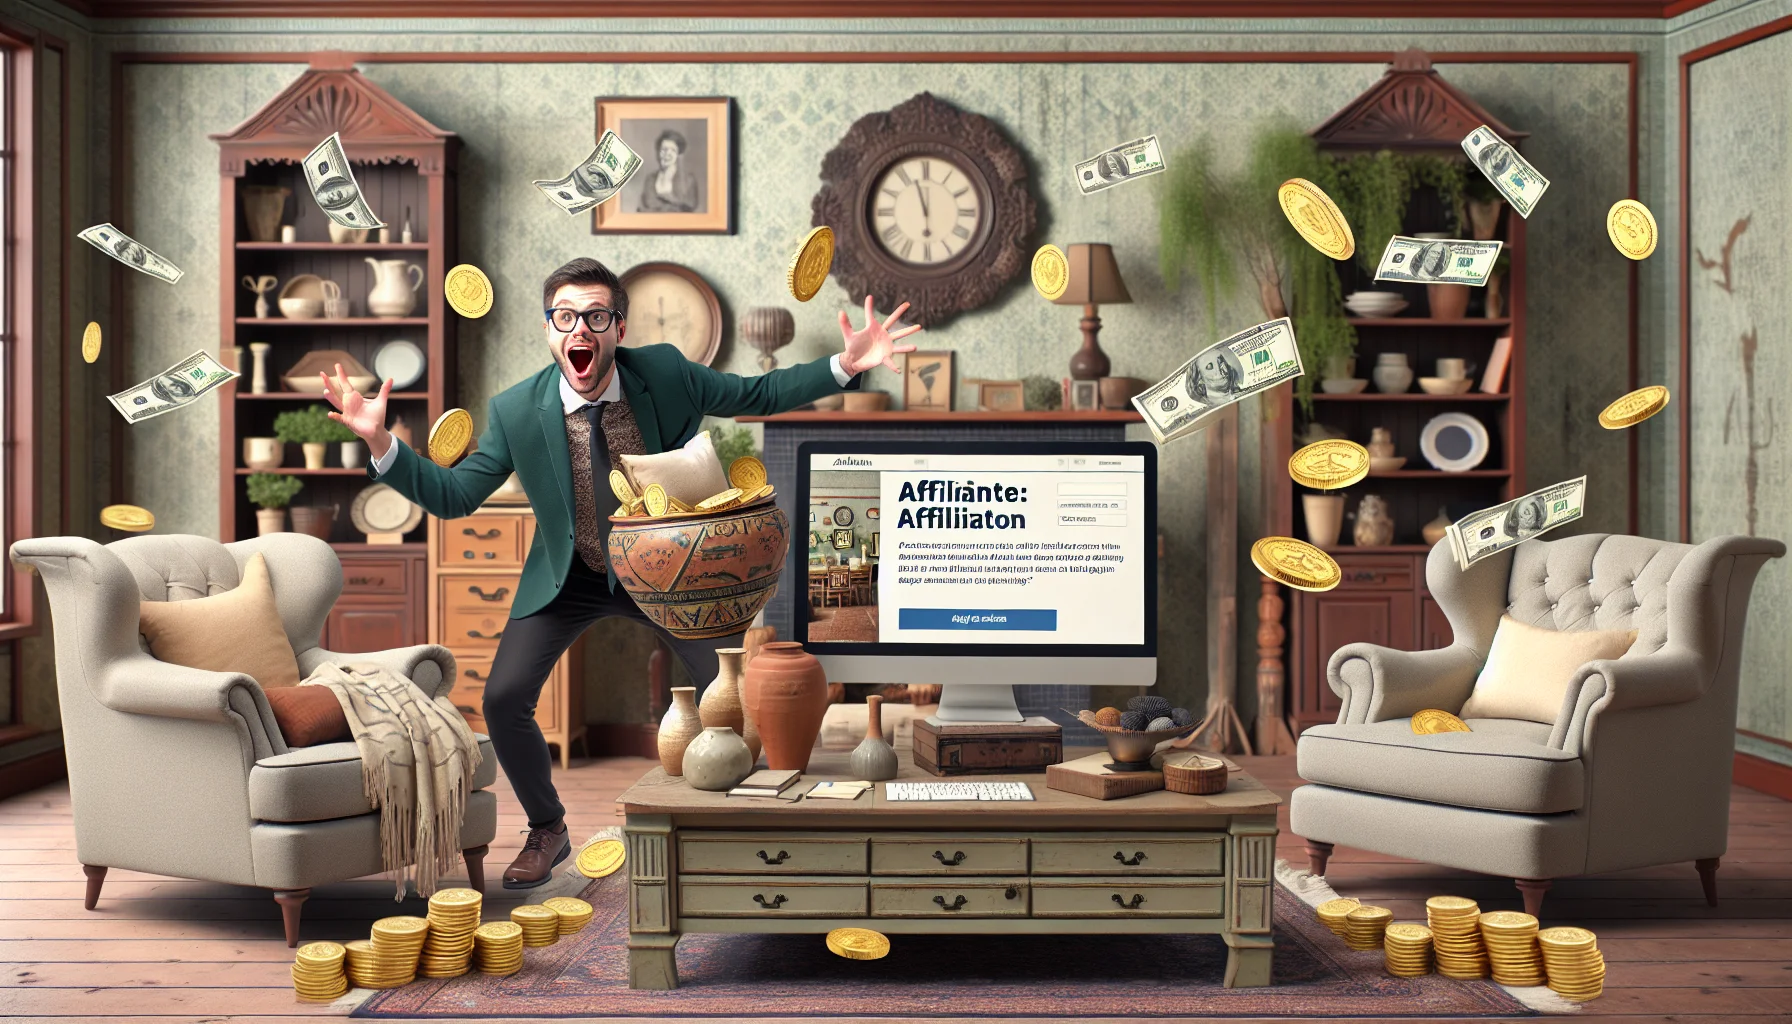 Create a humorous and realistic image encapsulating the concept of an affiliate program from a fictitious home furnishing and decor store, akin to Pottery Barn. The scenario involves an energetic marketer enthusiastically promoting various stylish and vintage furnishings, with adornments of gold coins and dollar bills subtly integrated into the designs. This could be set against a backdrop of a well-decorated, cozy living room, emphasizing the online aspect, including a computer displaying a website interface for earning through affiliation. Add touches of comedy to make the image entertaining and enticing.